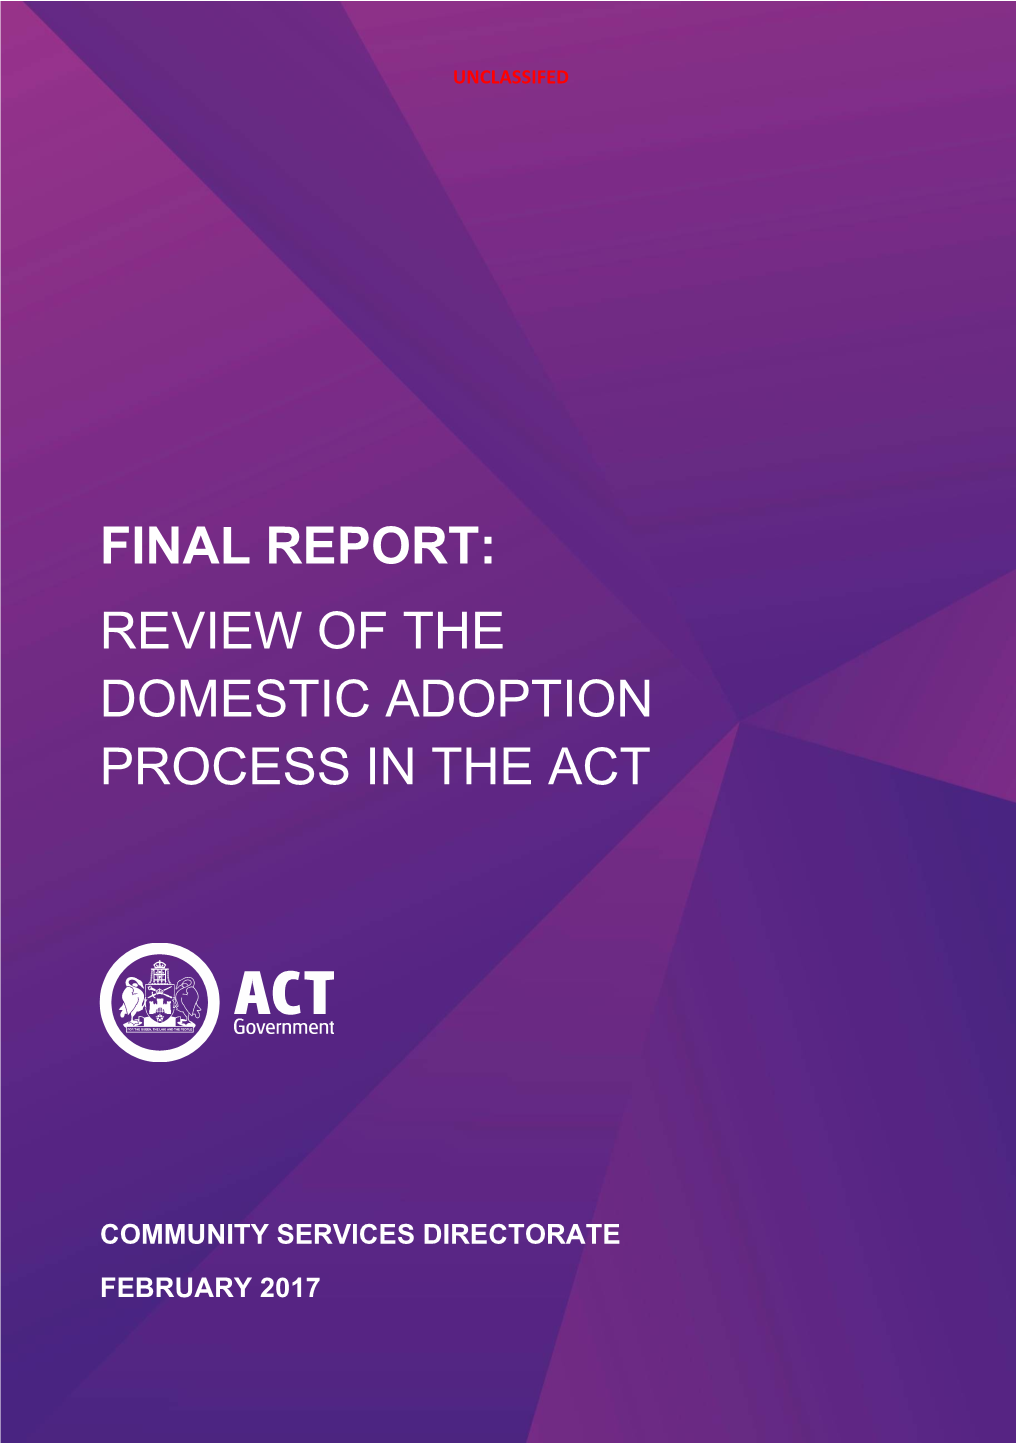 Final Report: Review of the Domestic Adoption Process in the ACT